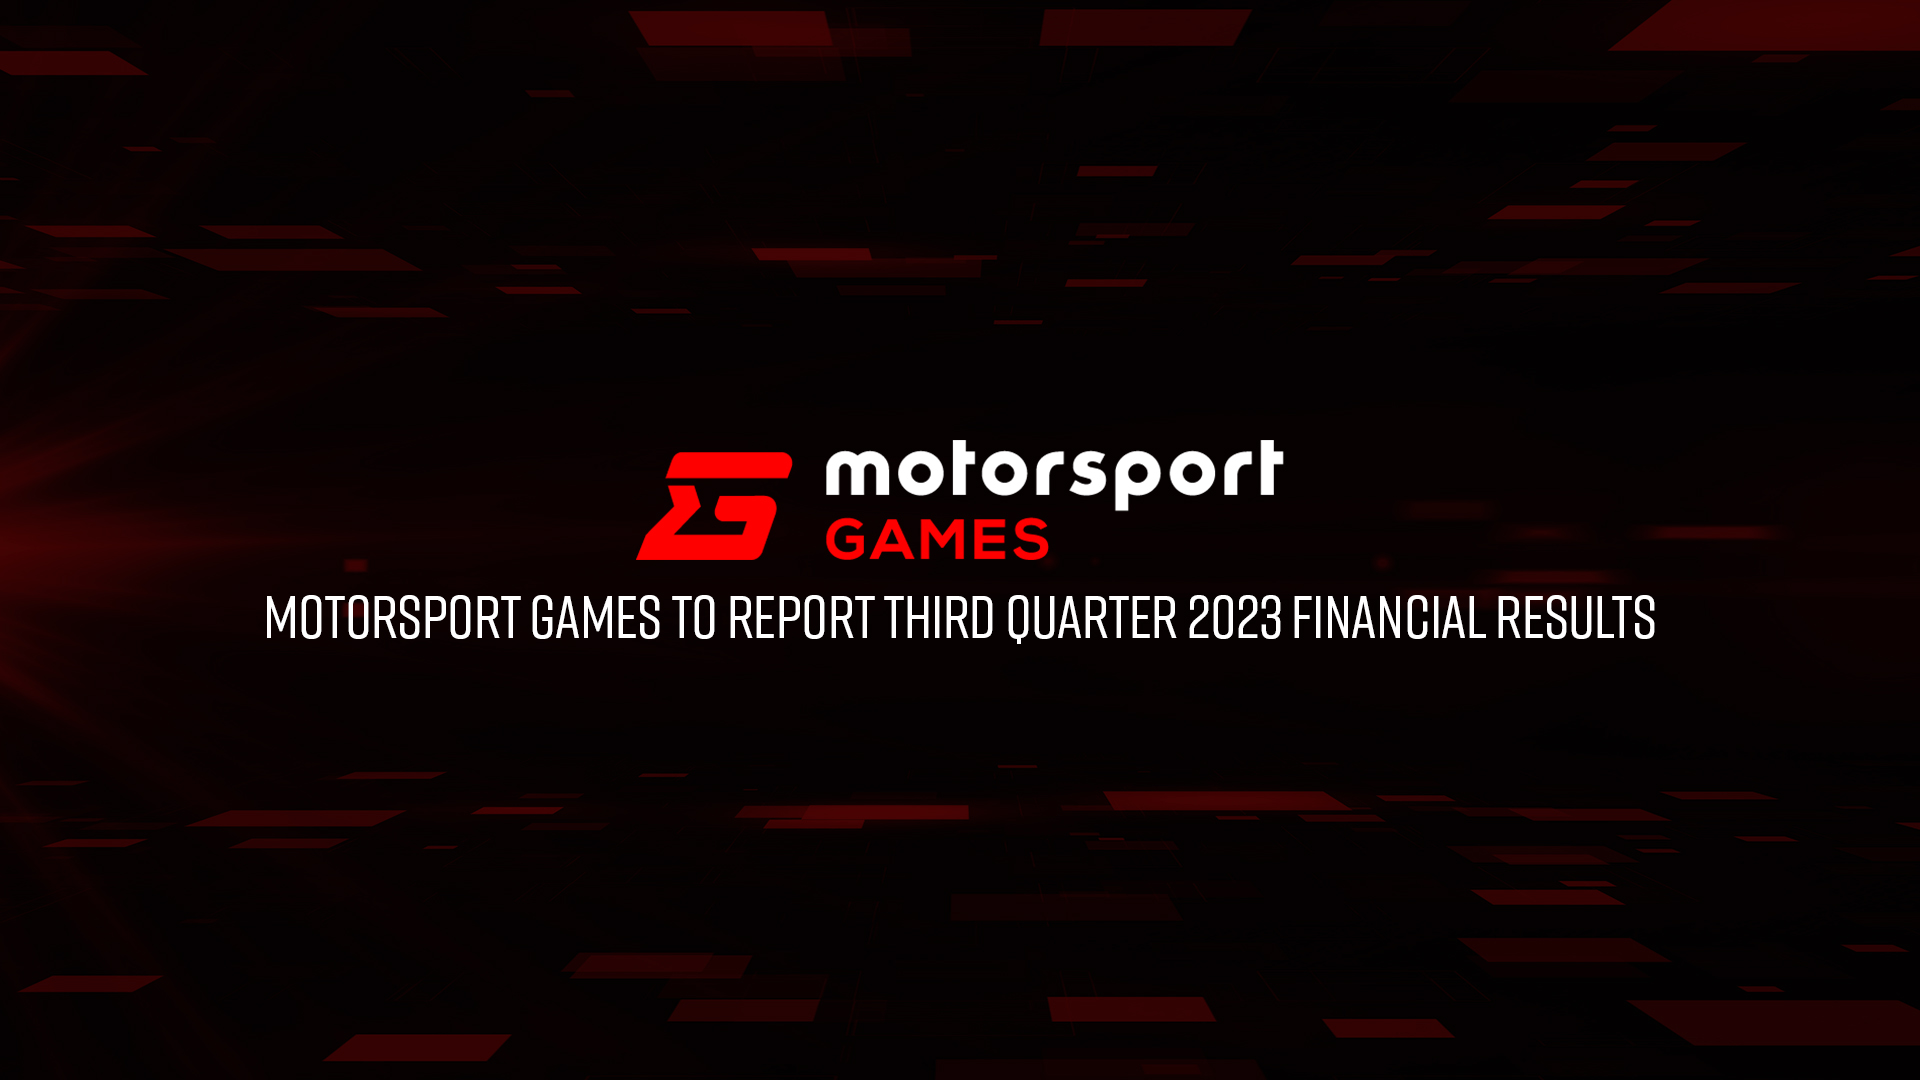 Motorsport Games to Report Third Quarter 2023 Financial Results